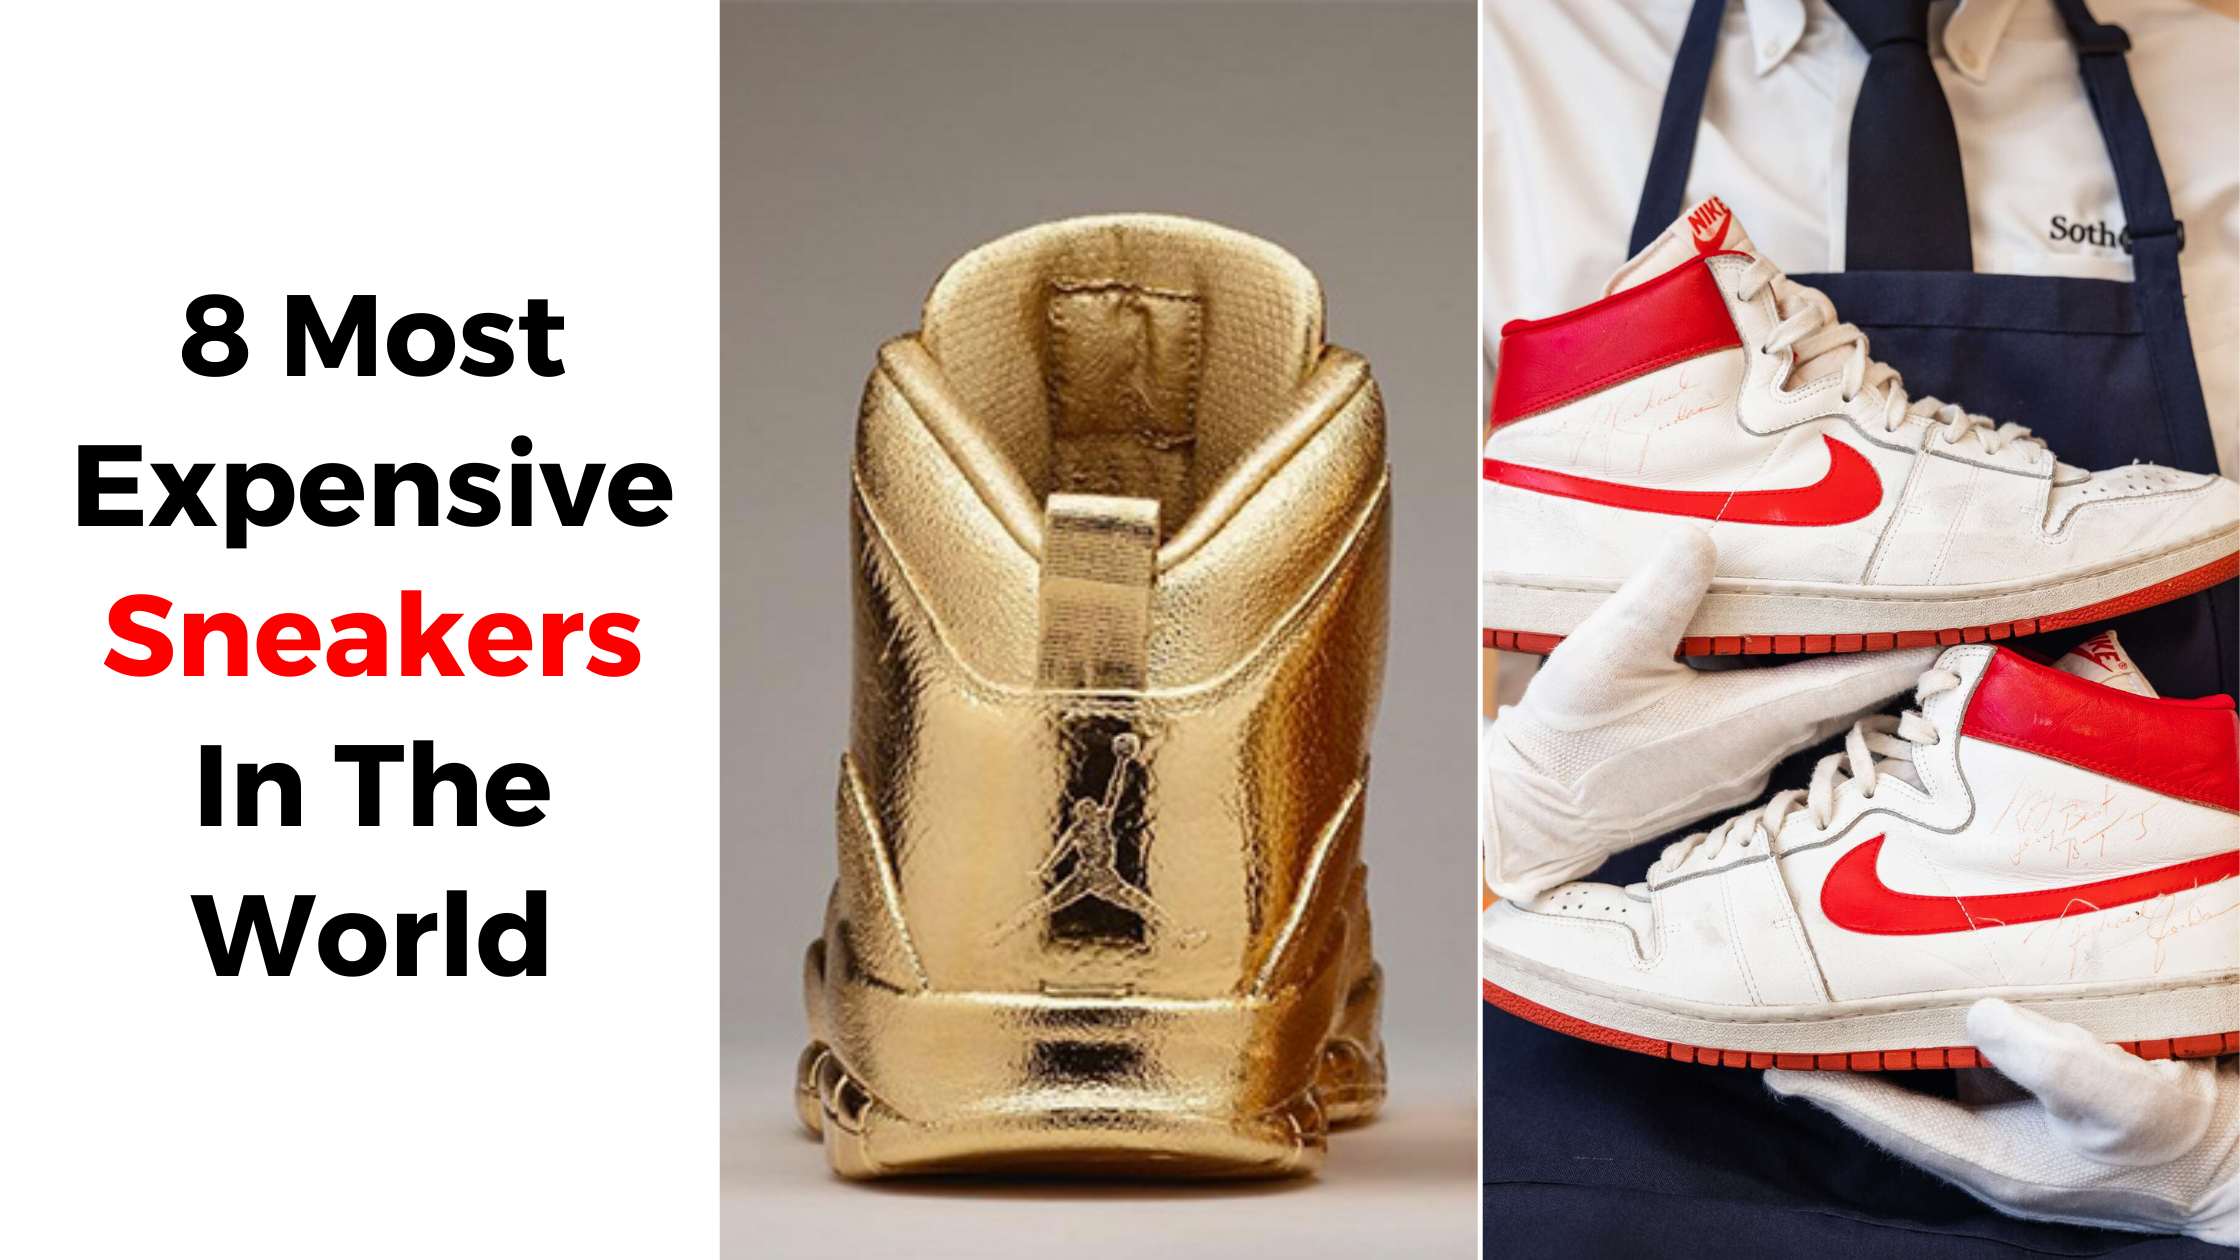 5 of the Most Expensive Sneakers Ever Made